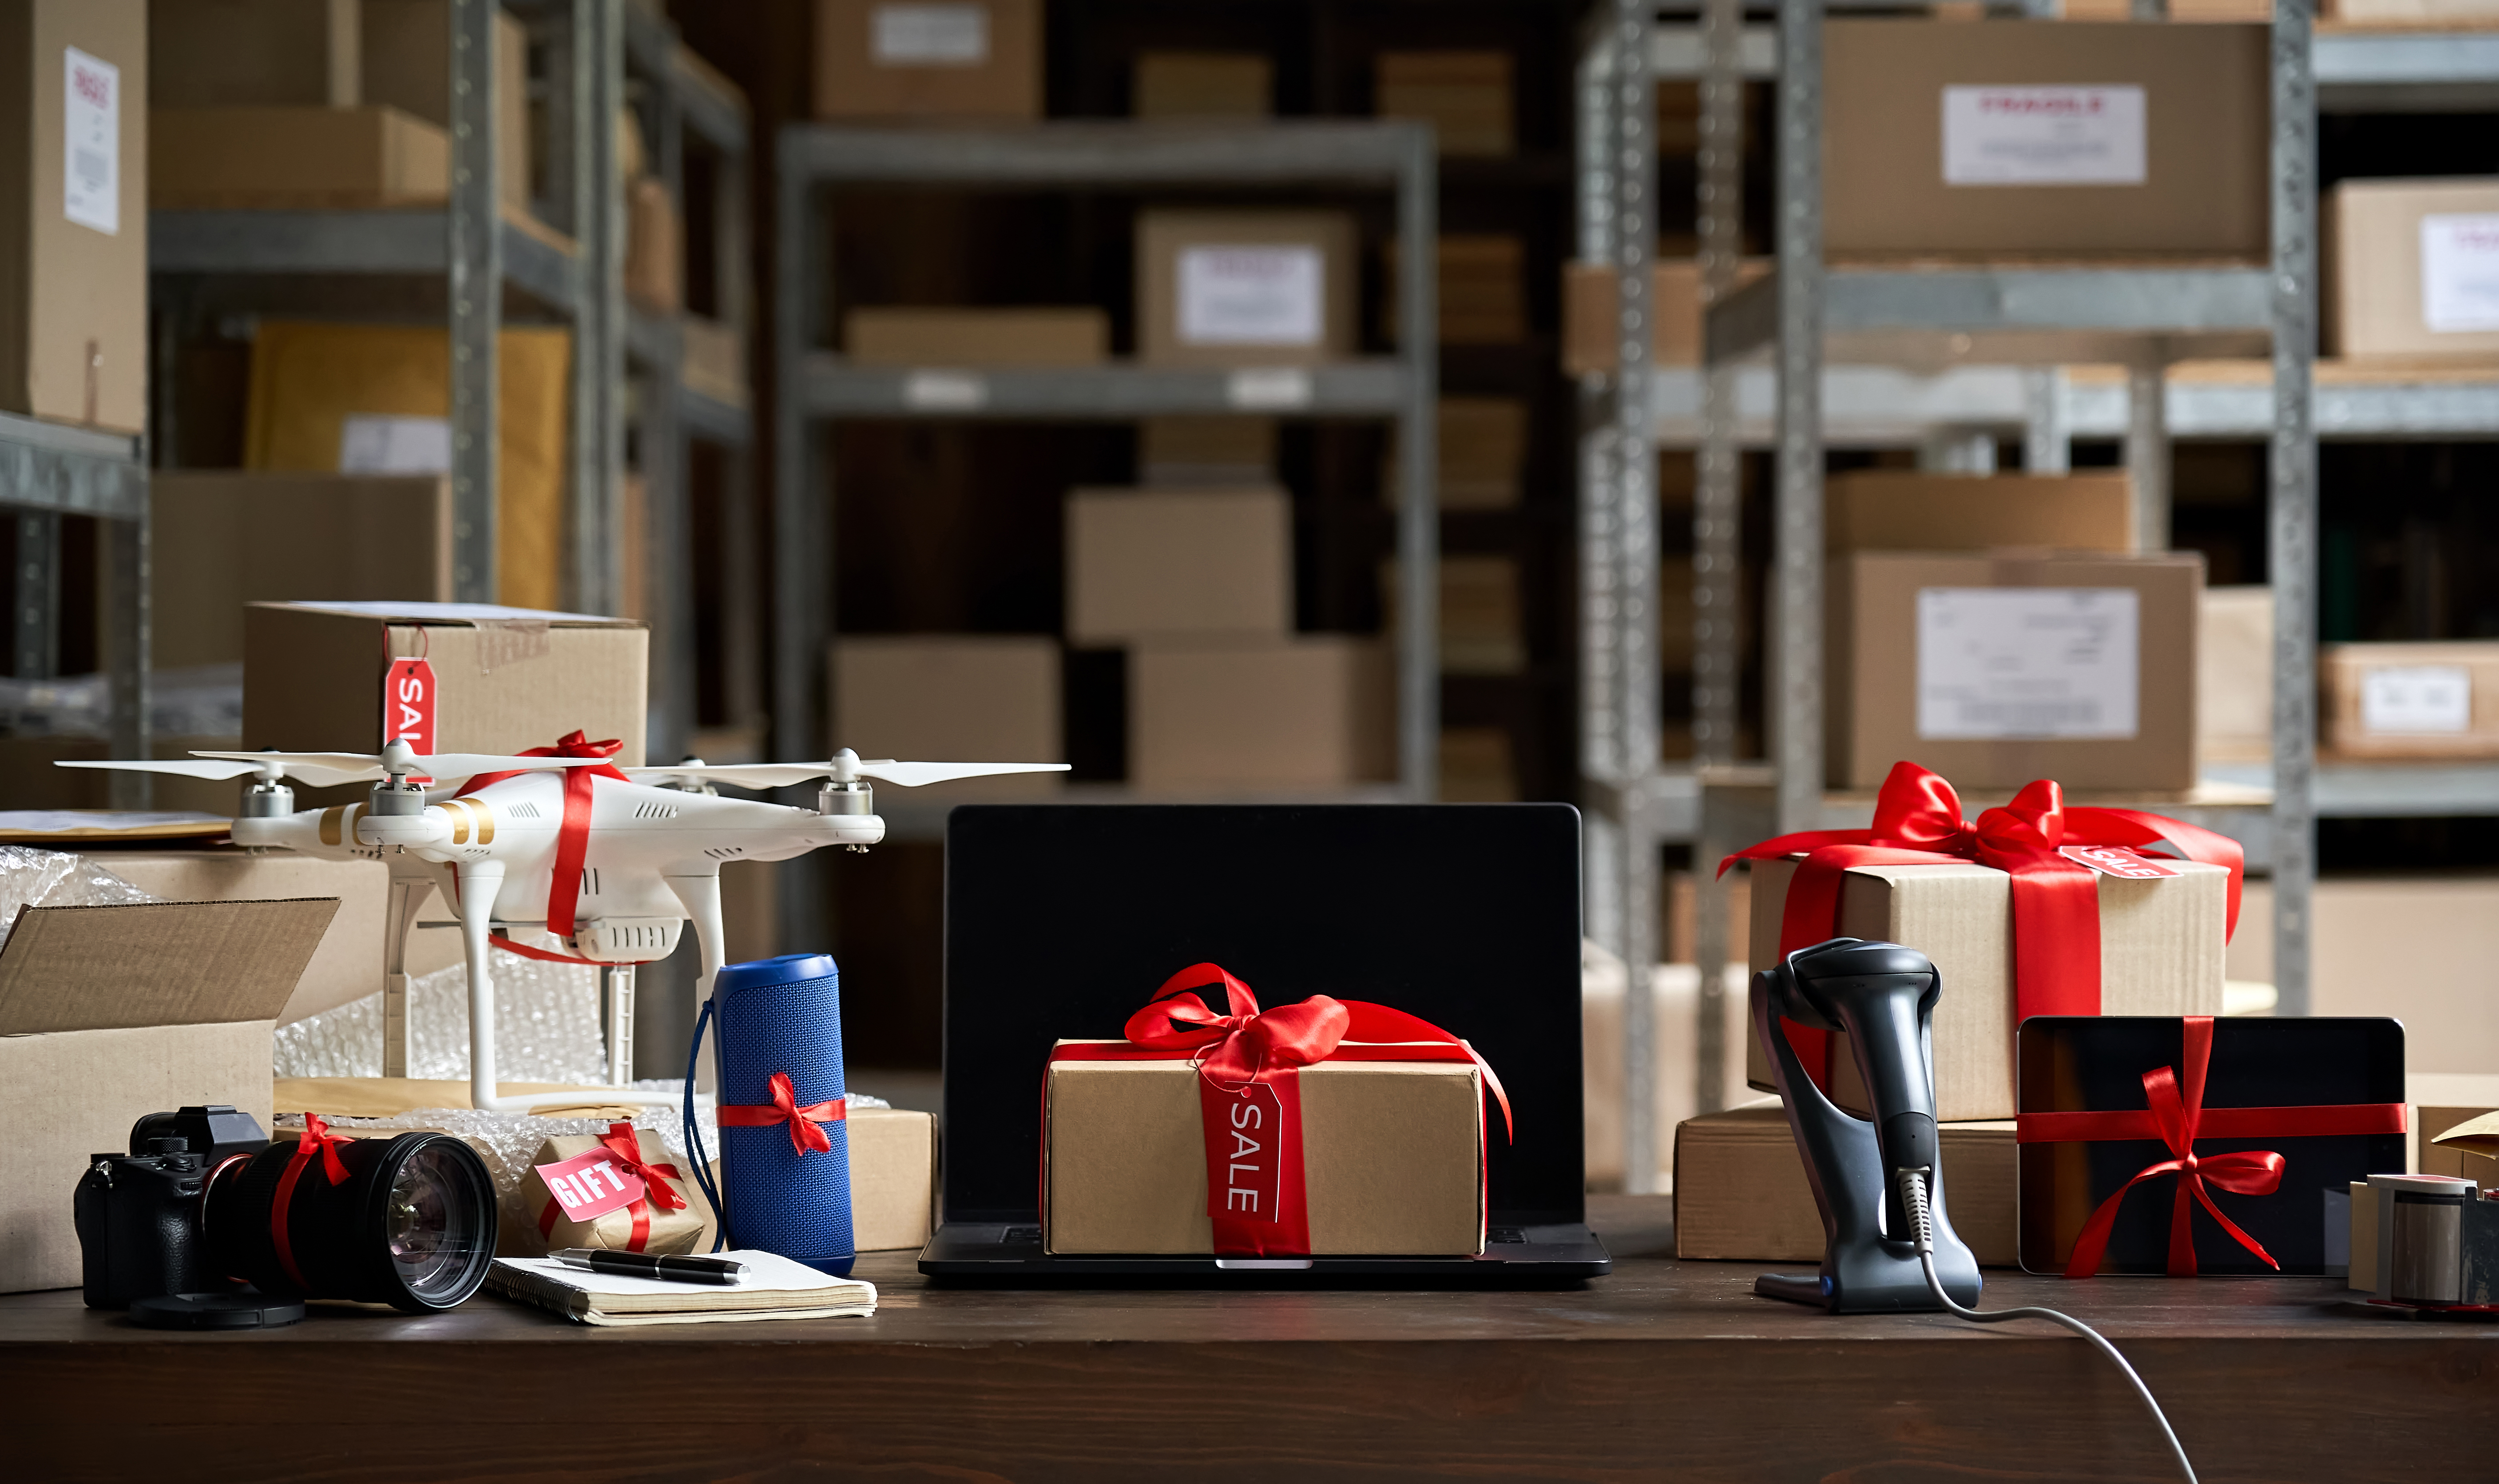 While the holiday season in the fourth quarter every year is the most important time for retailers, significant holiday sales remain well beyond Christmas. photo credit: shutterstock